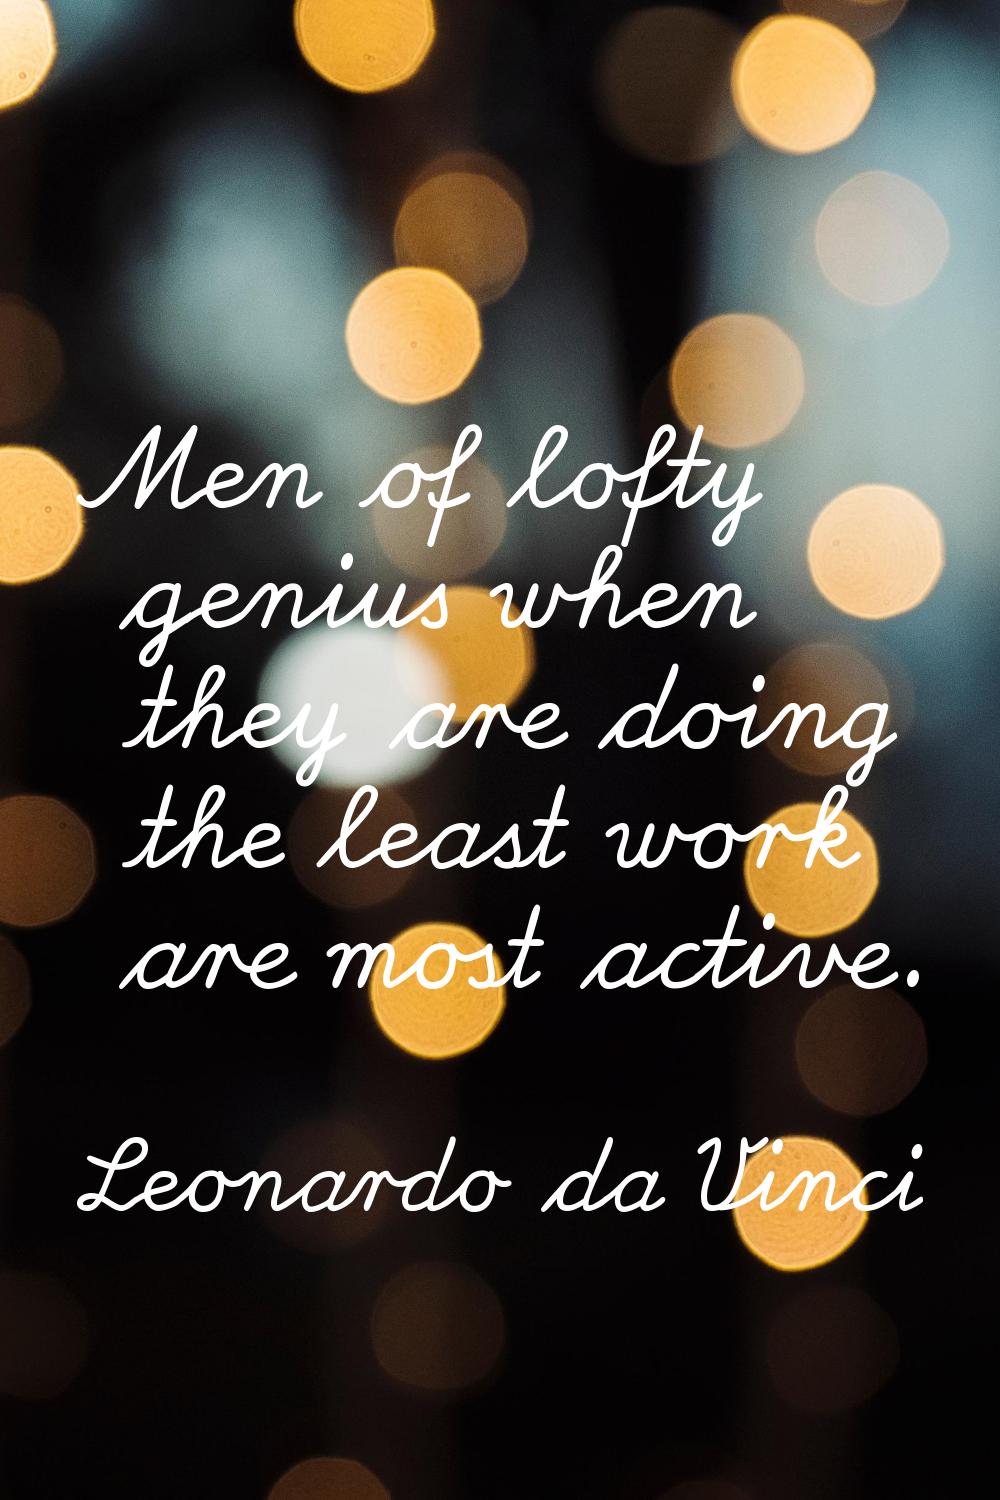 Men of lofty genius when they are doing the least work are most active.